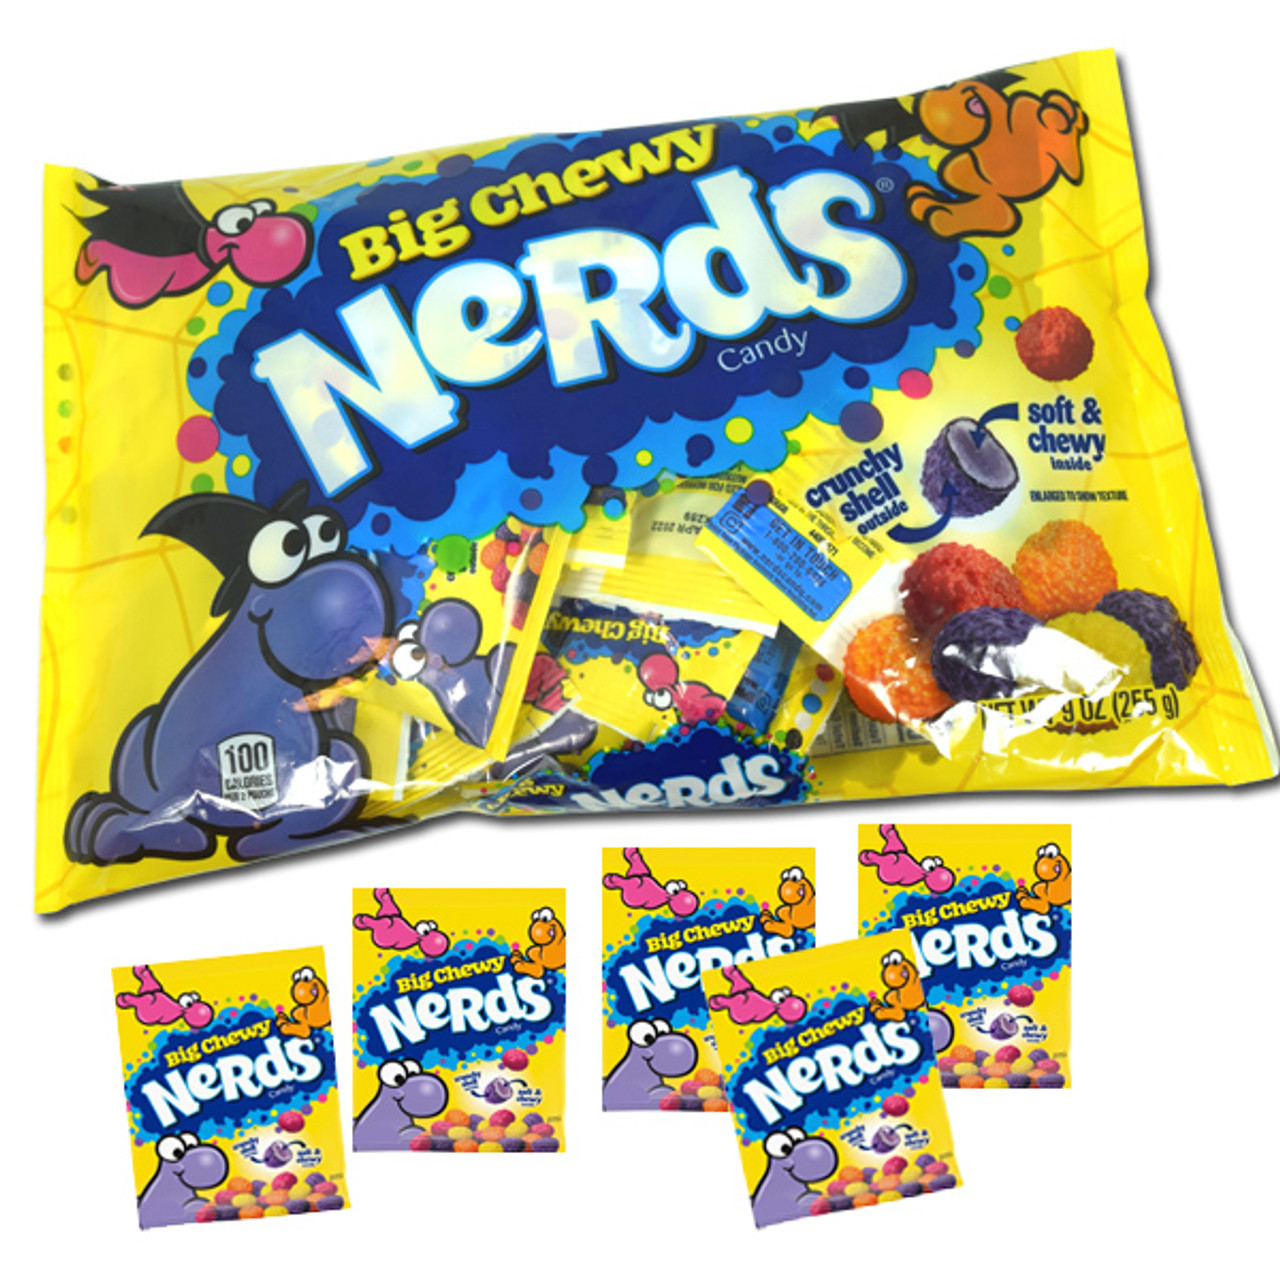 Nerds Big Chewy Snack Size Candy 9oz Bag